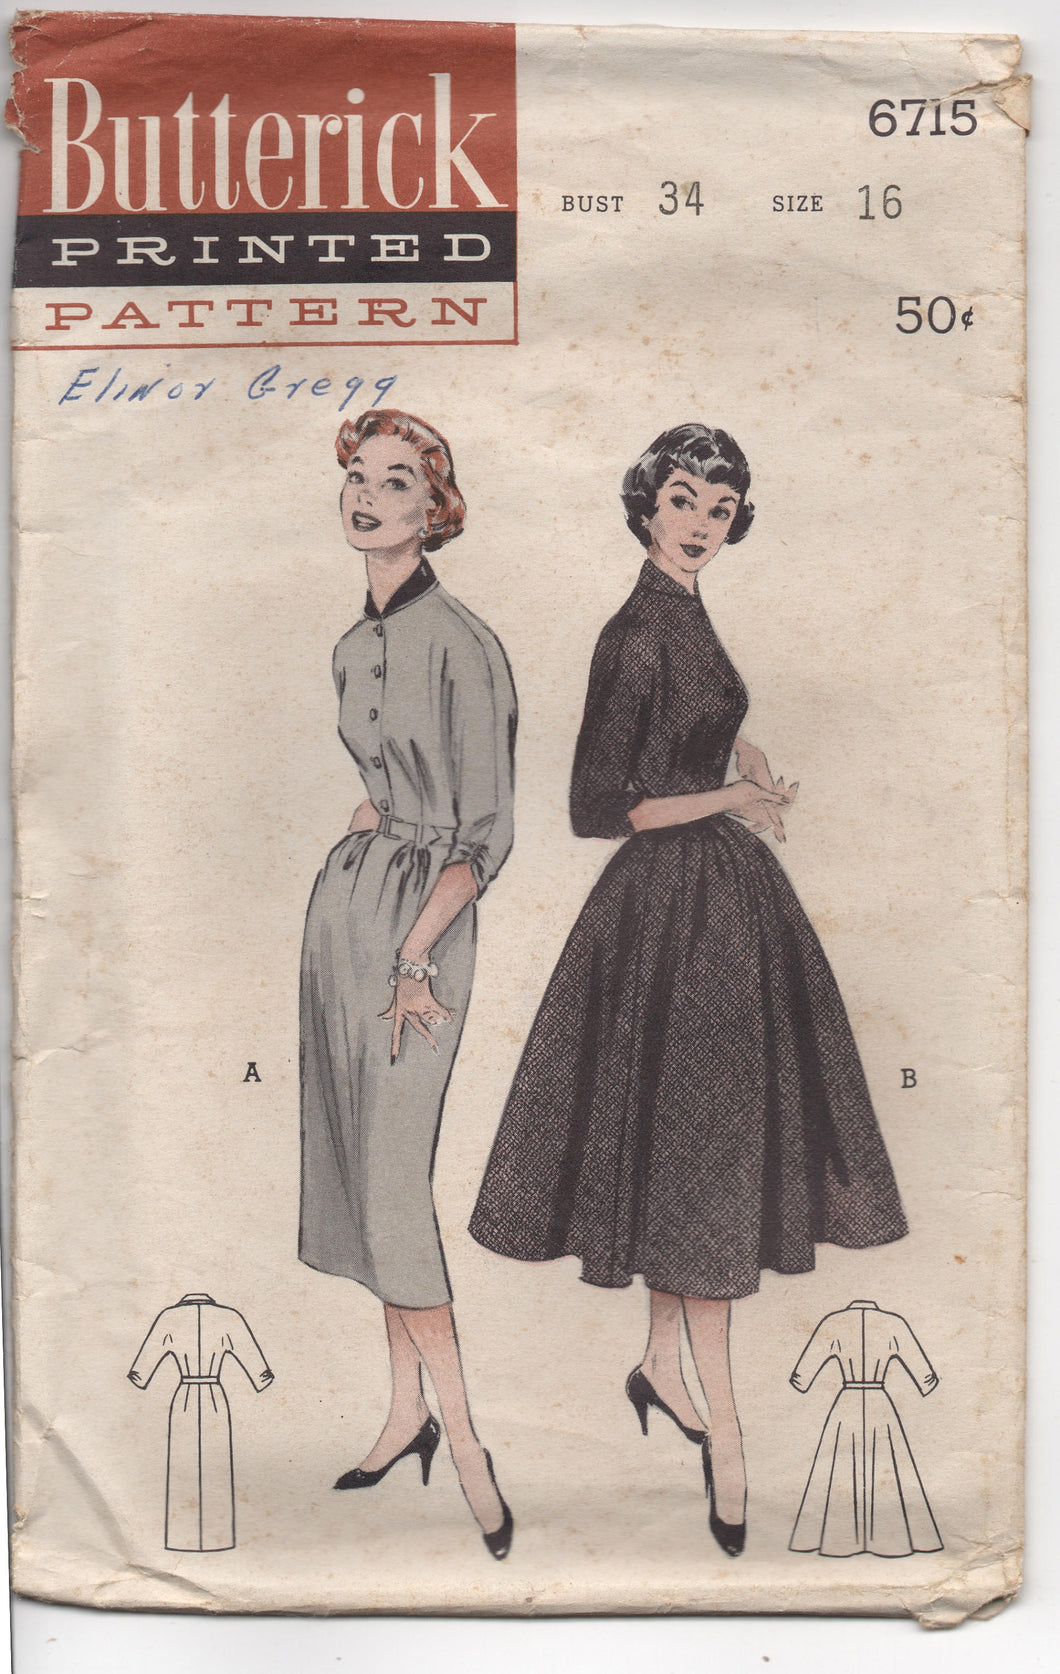 1950's Butterick One Piece Dress with Sloped Shoulders and Bouffant Skirt Pattern - Bust 34